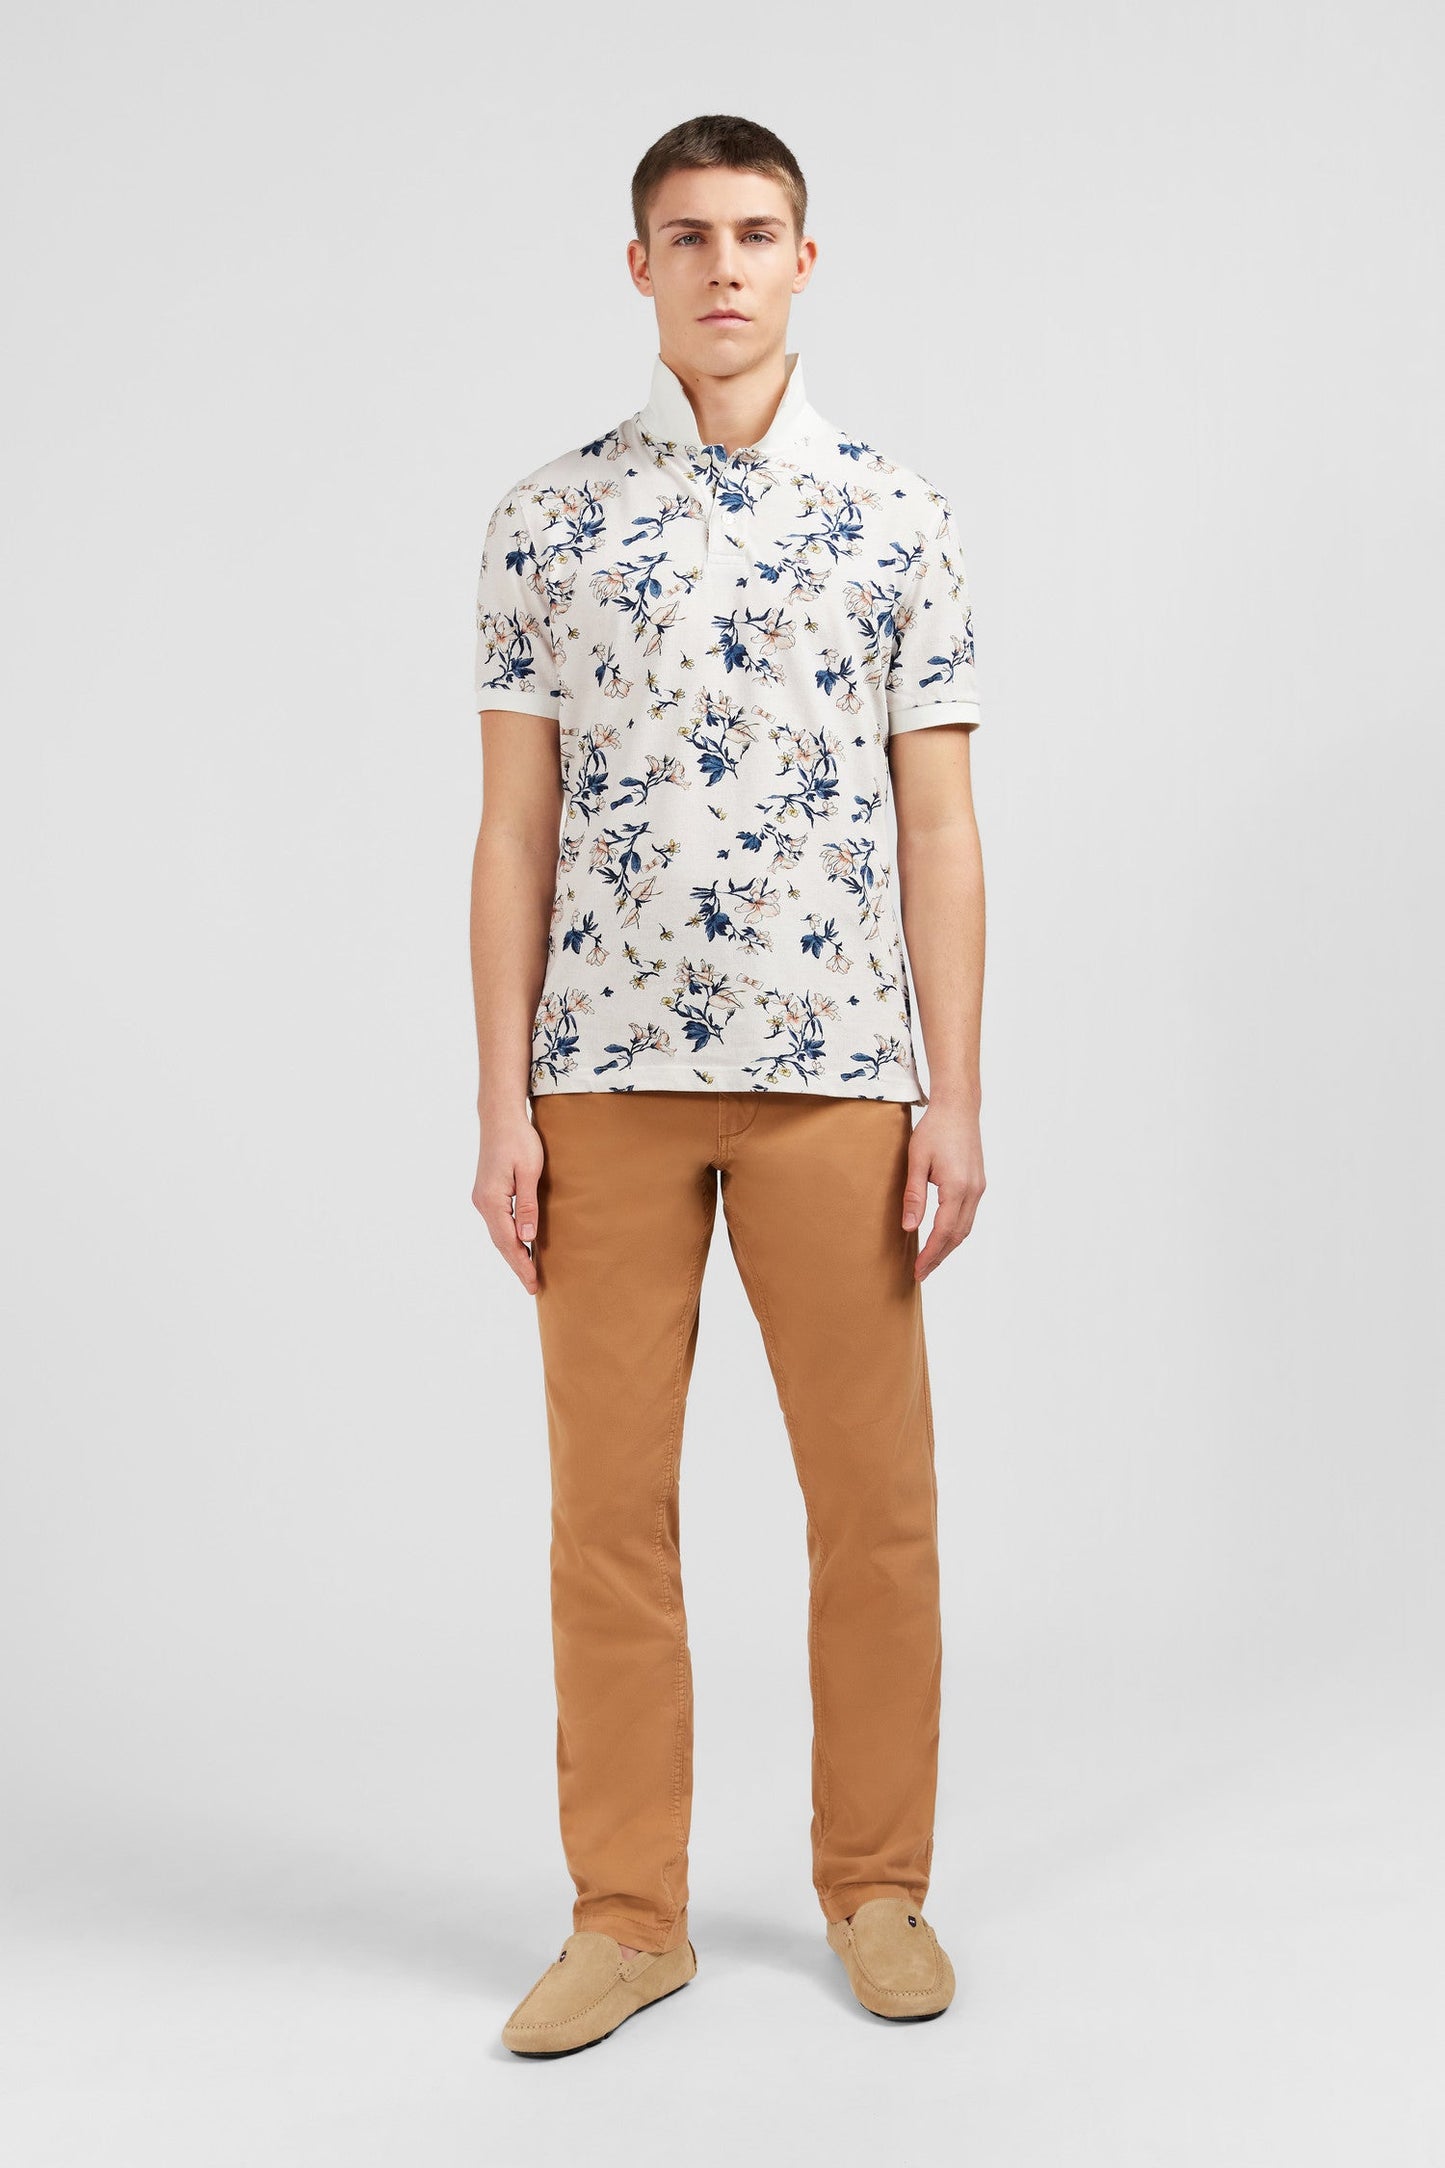 White polo shirt with an exclusive floral print - Image 3